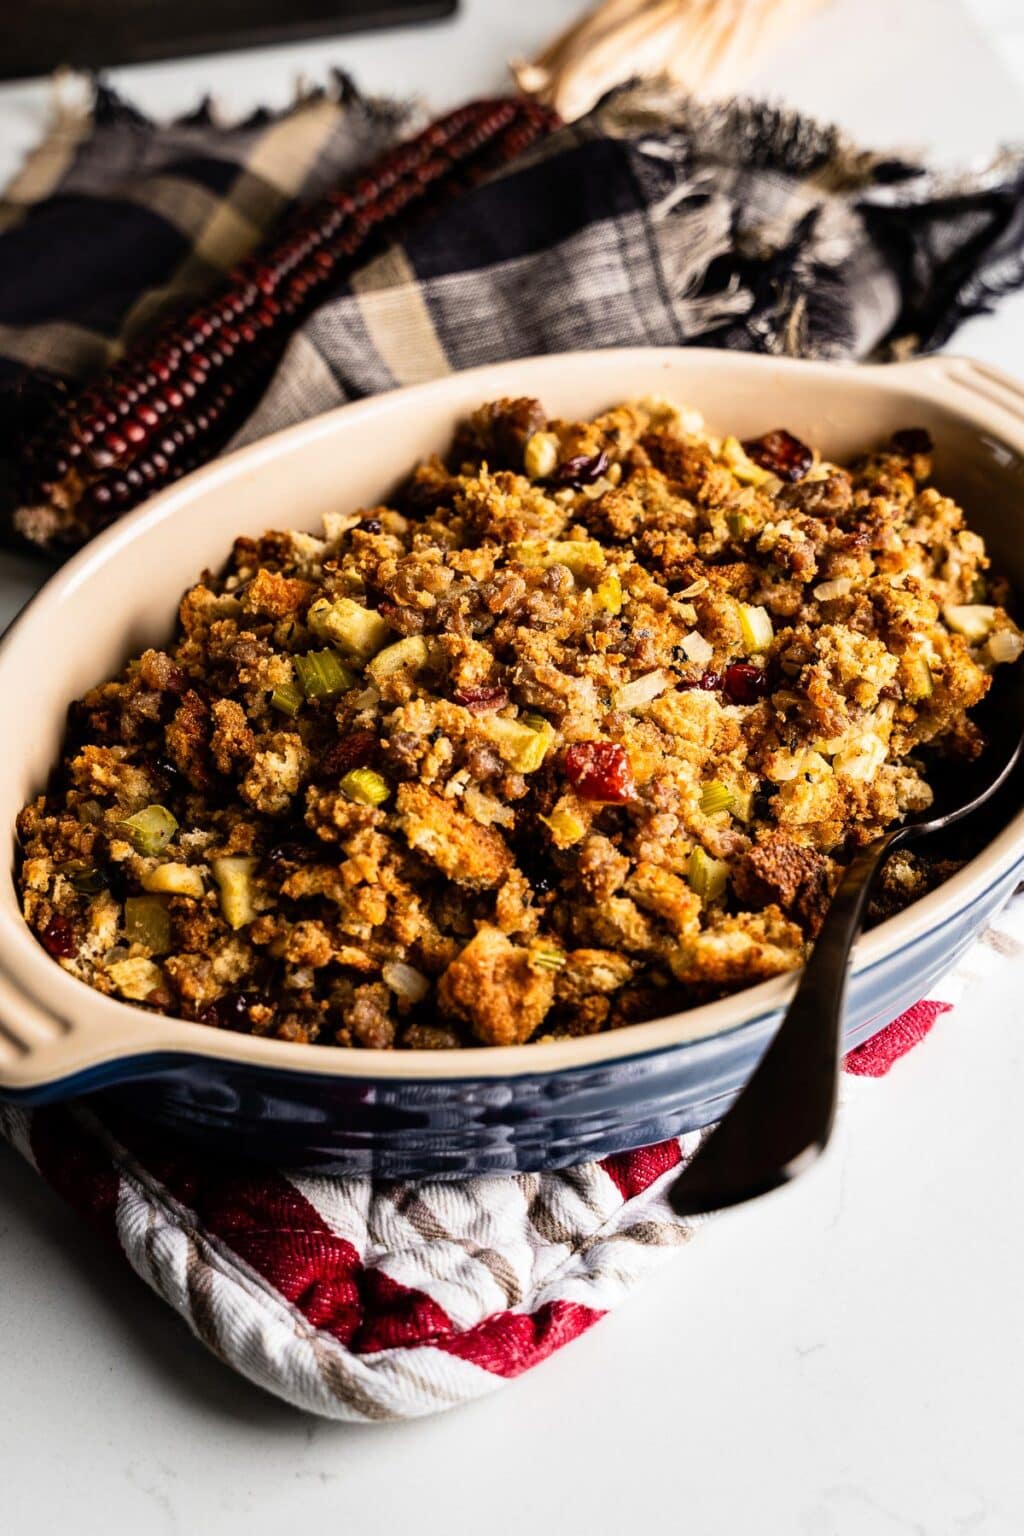 Easy Sausage Stuffing Recipe with Apples, Cranberries and Herbs